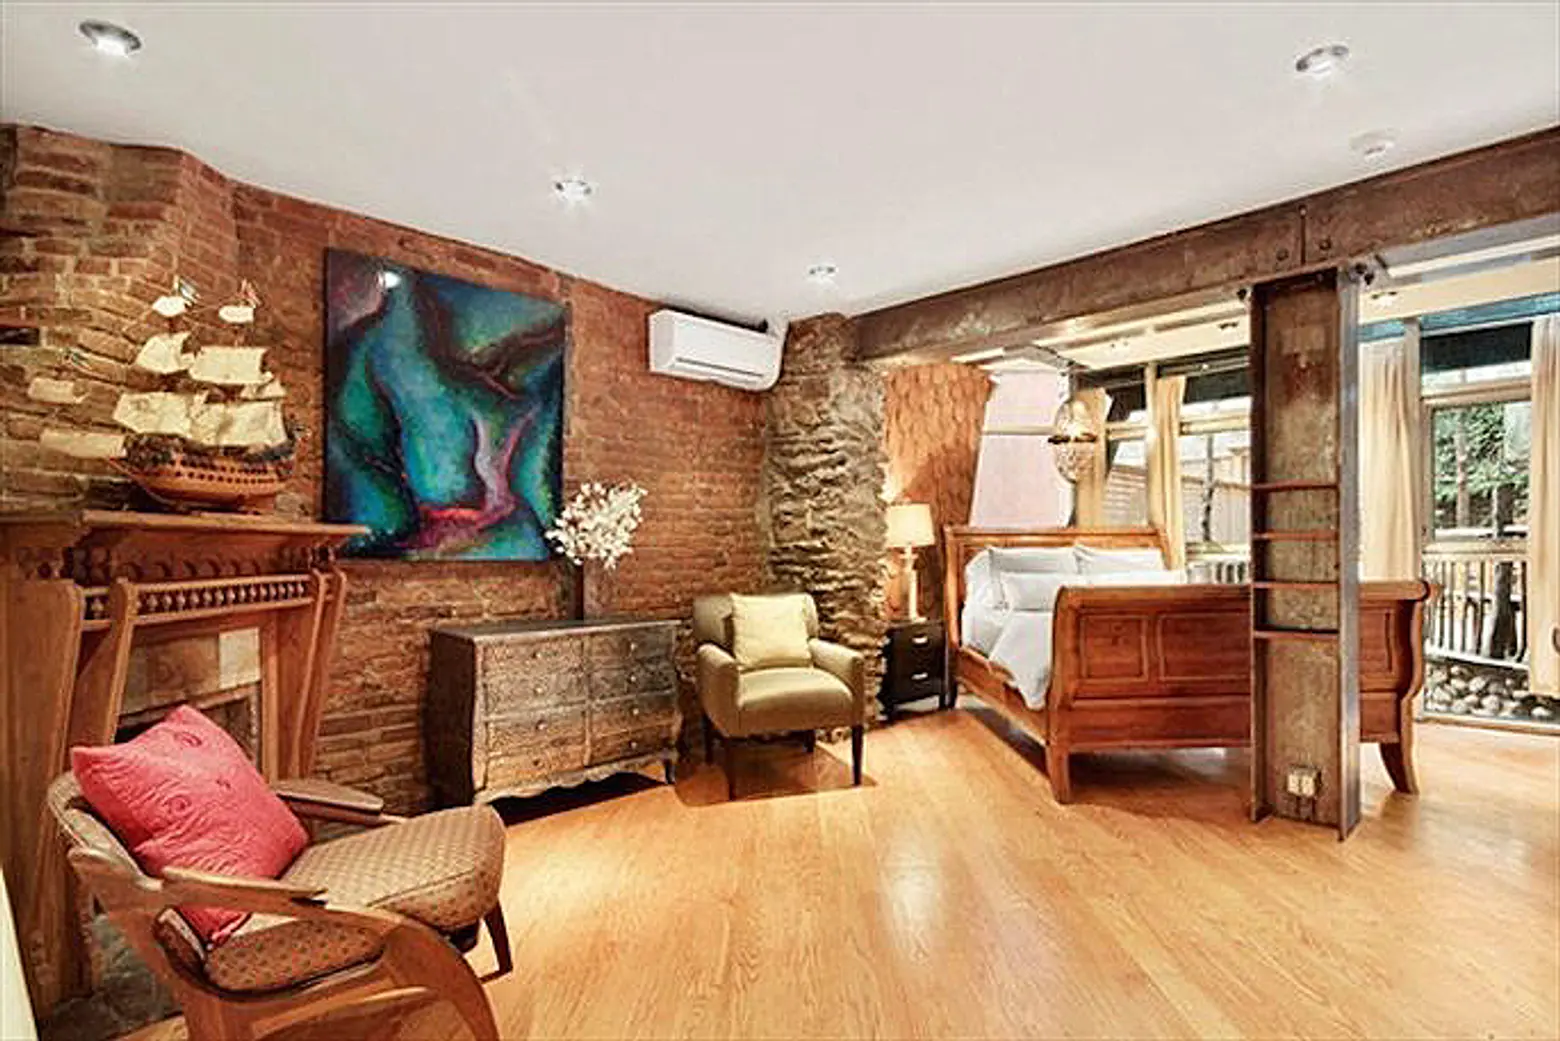 121 West 15th Street Apt. GDN DPLX, home with fireman pole, quirky home with great backyard